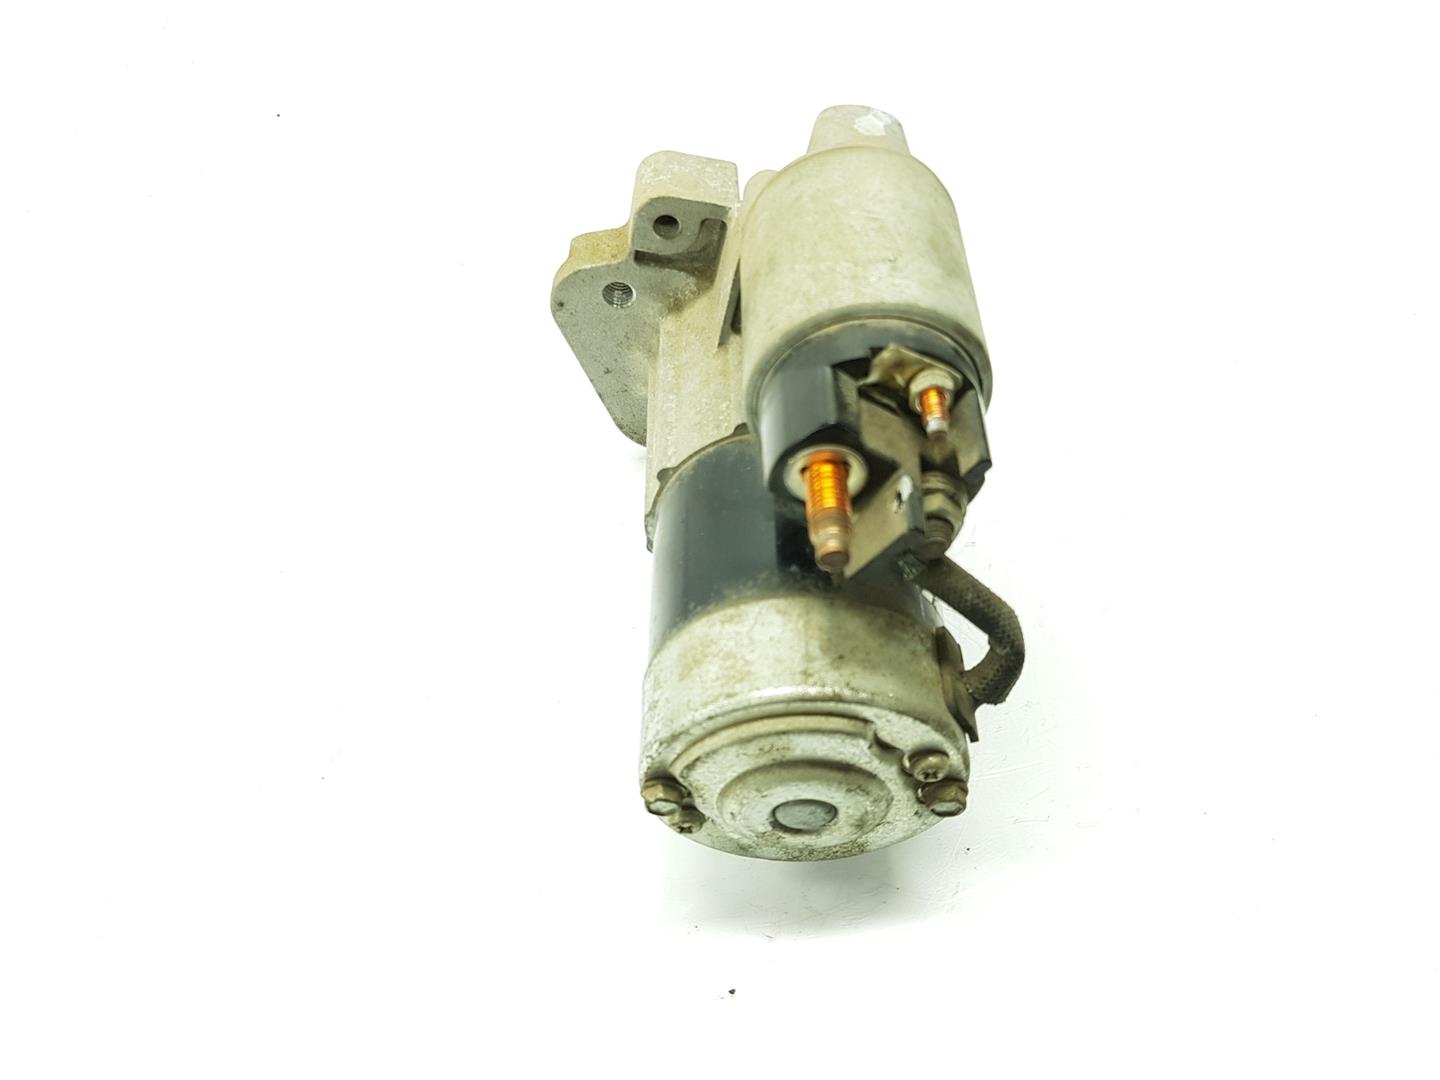 RENAULT Clio 3 generation (2005-2012) Starter Motor 8200584675A, 8200584675A 24238682